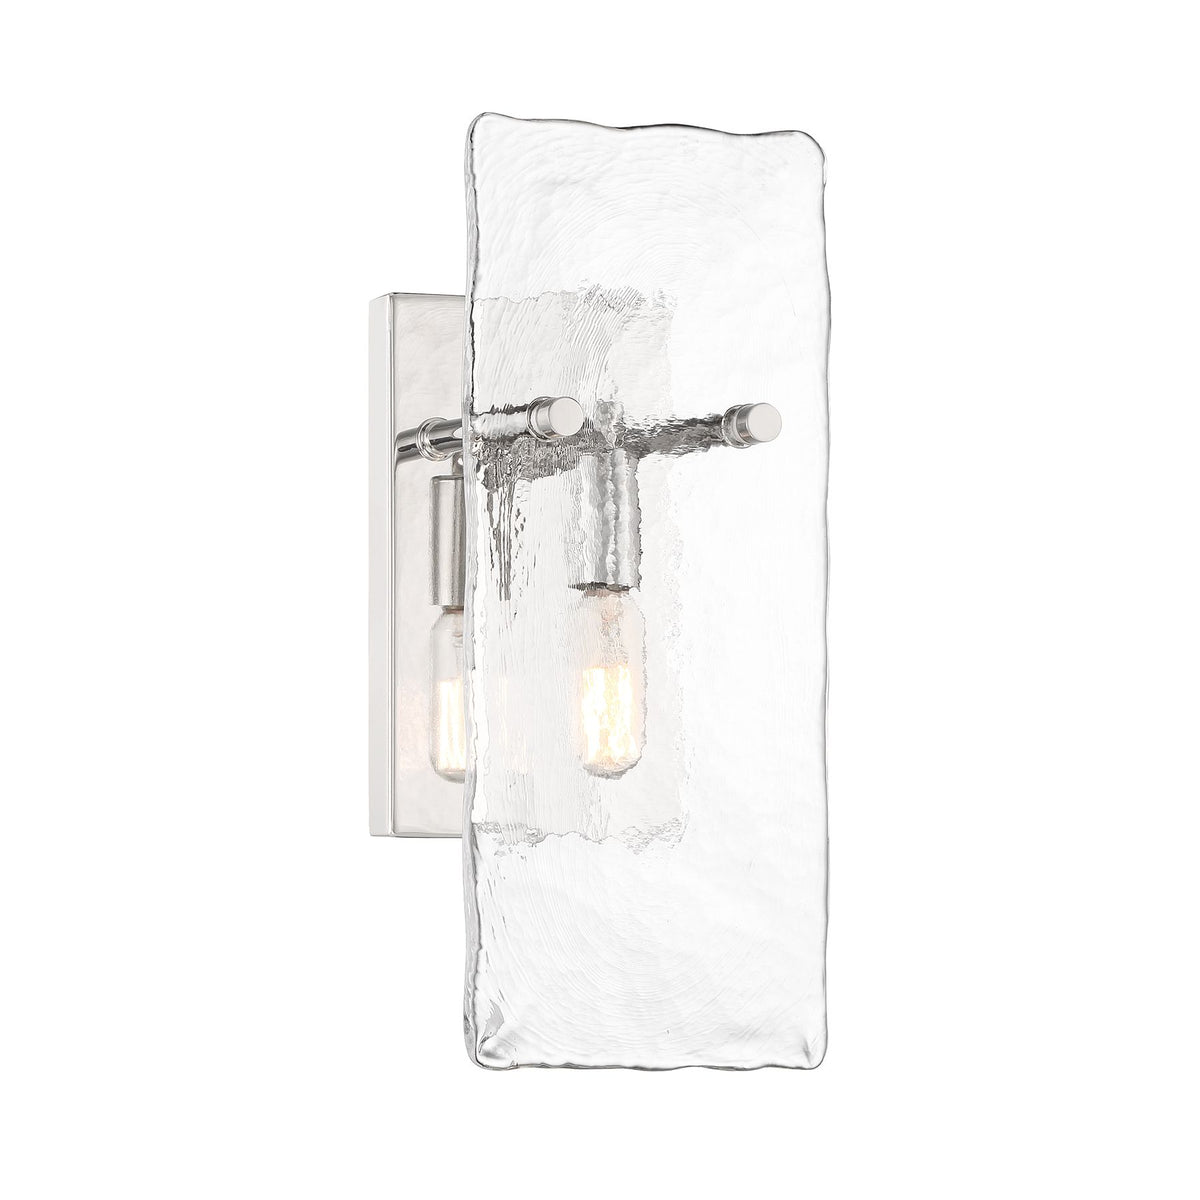 Genry Wall Sconce